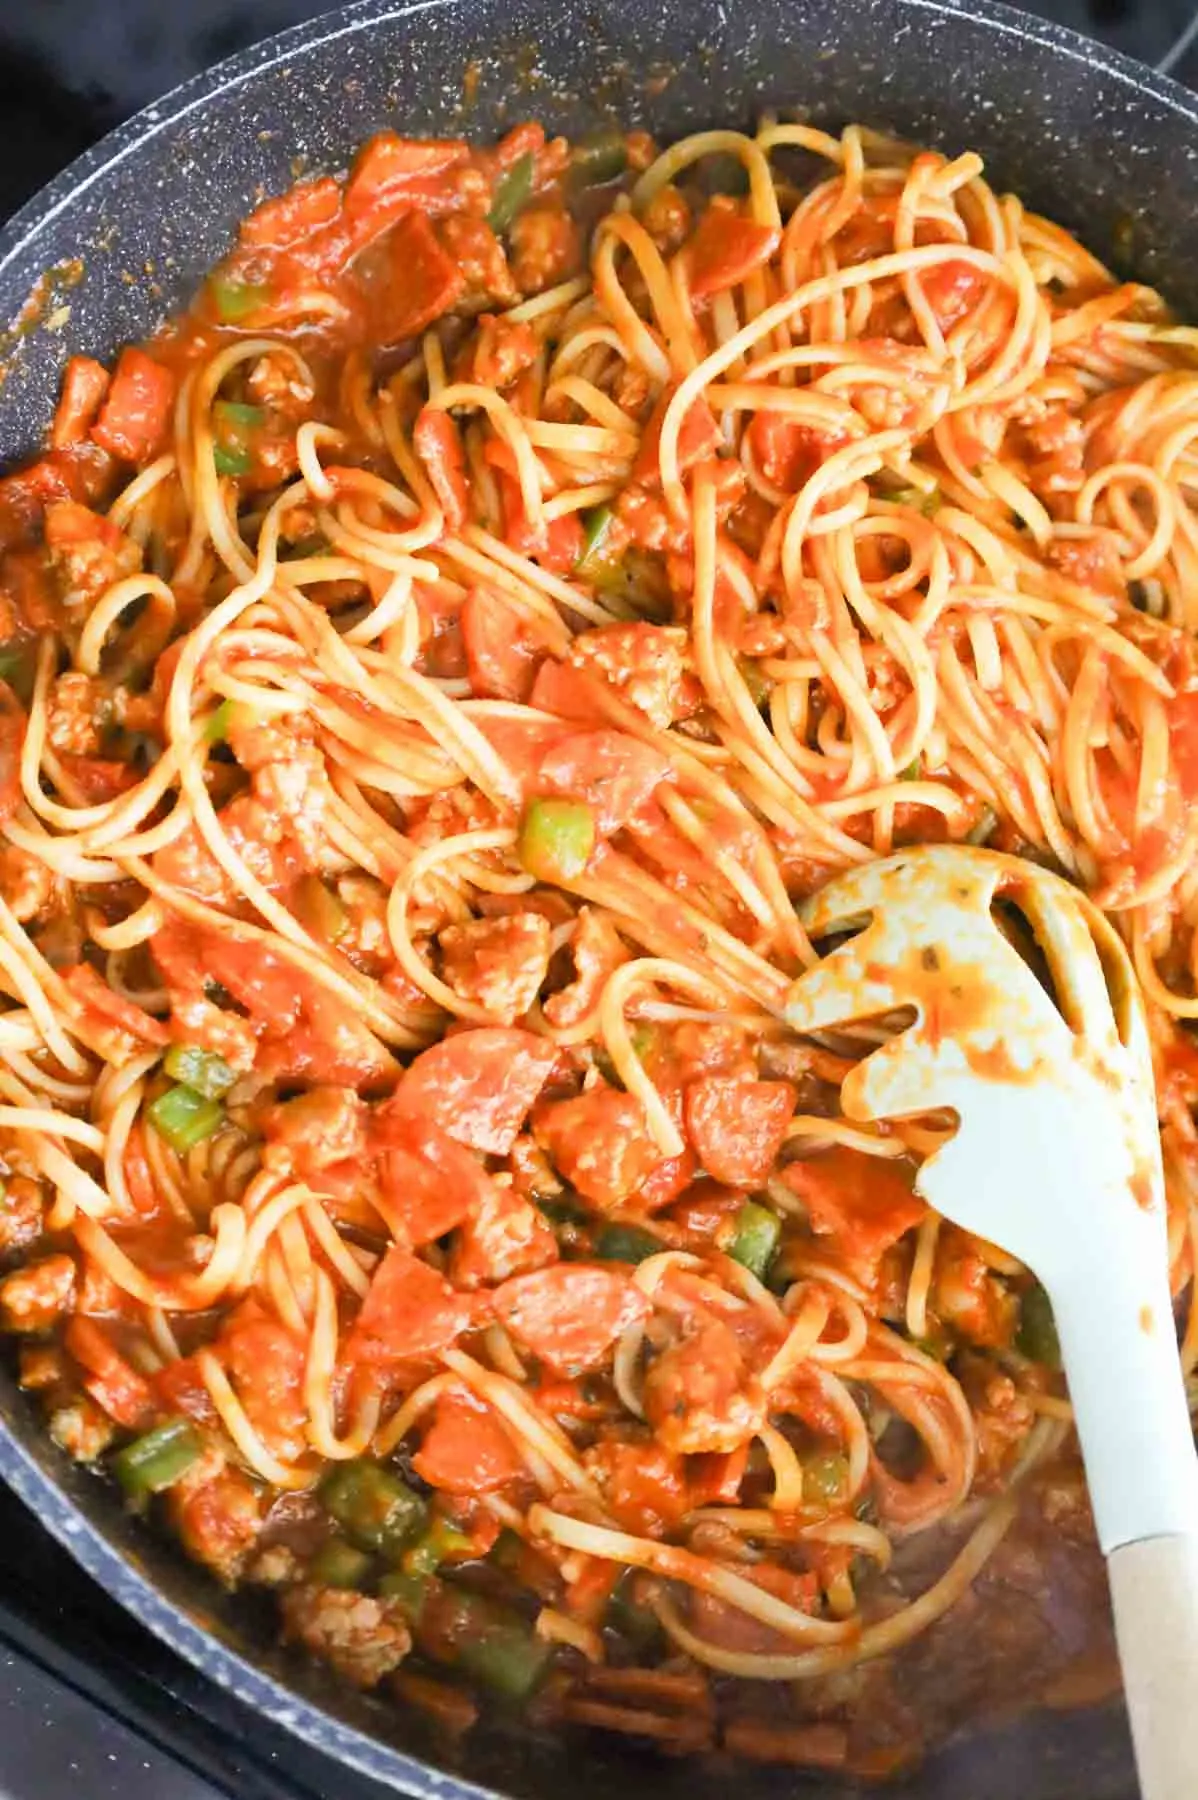 pepperoni, green pepper and sausage spaghetti mixture in a skillet